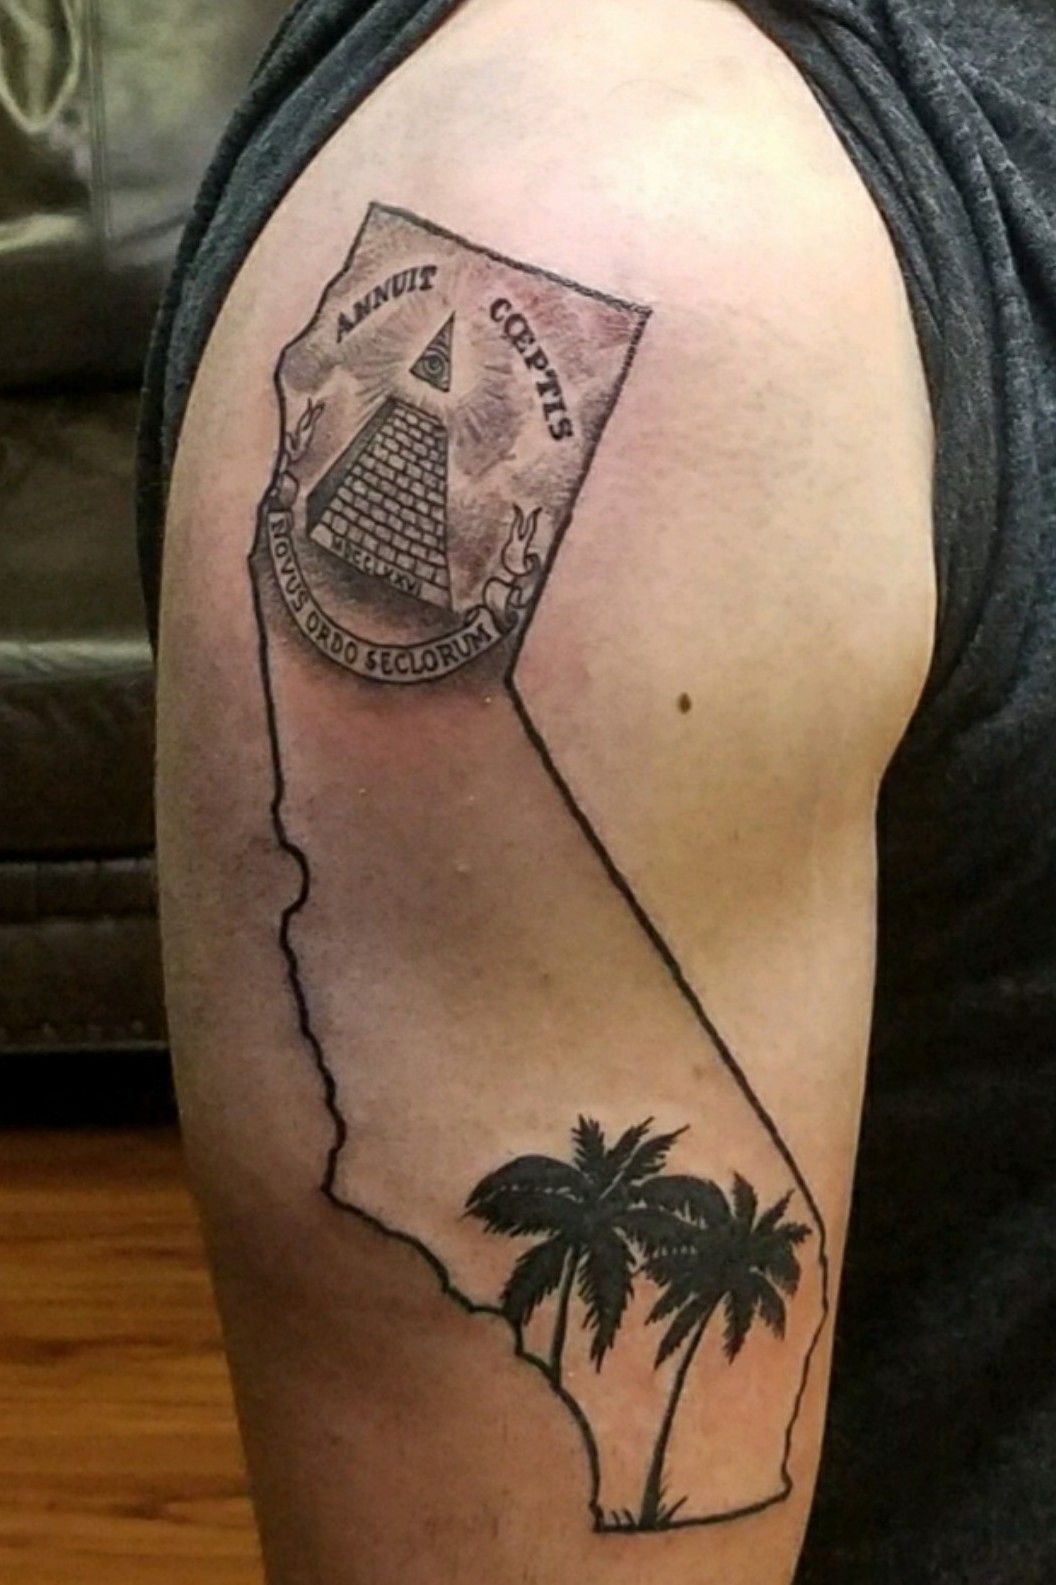 Just a happy little palm tree on my under forearm  rtattoo